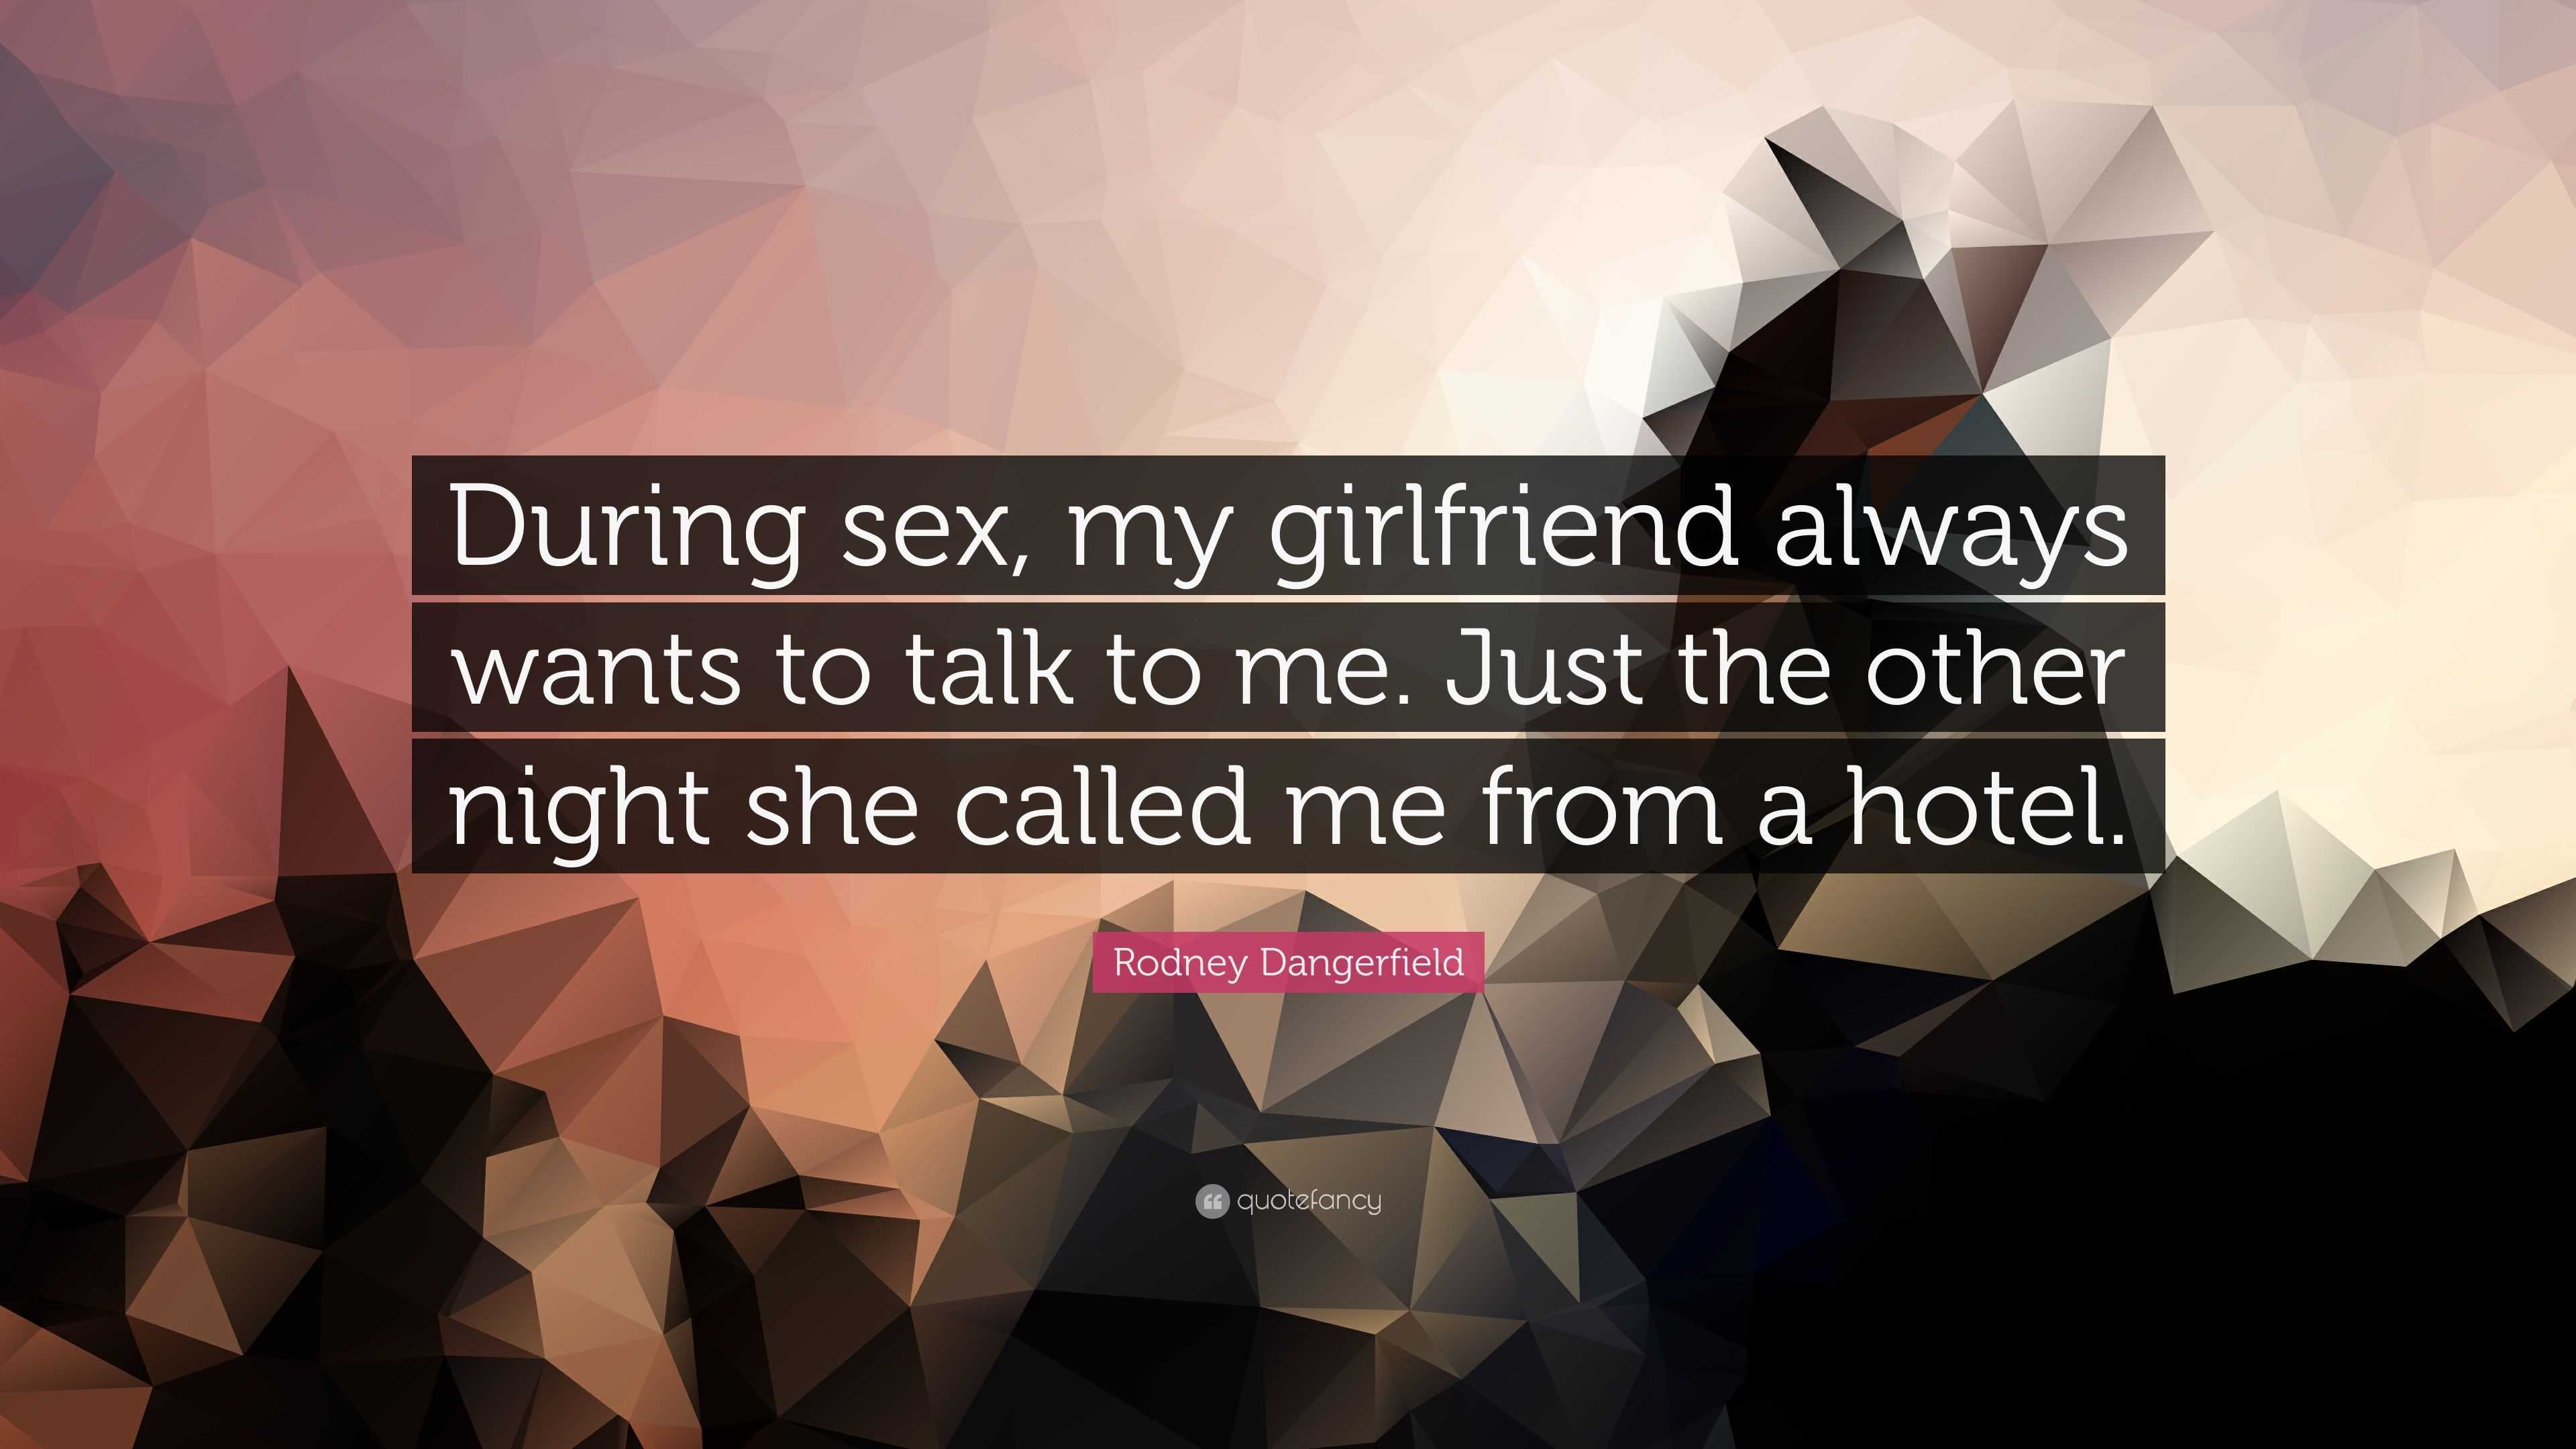 Rodney Dangerfield Quote “During sex, my girlfriend always wants to talk to me image